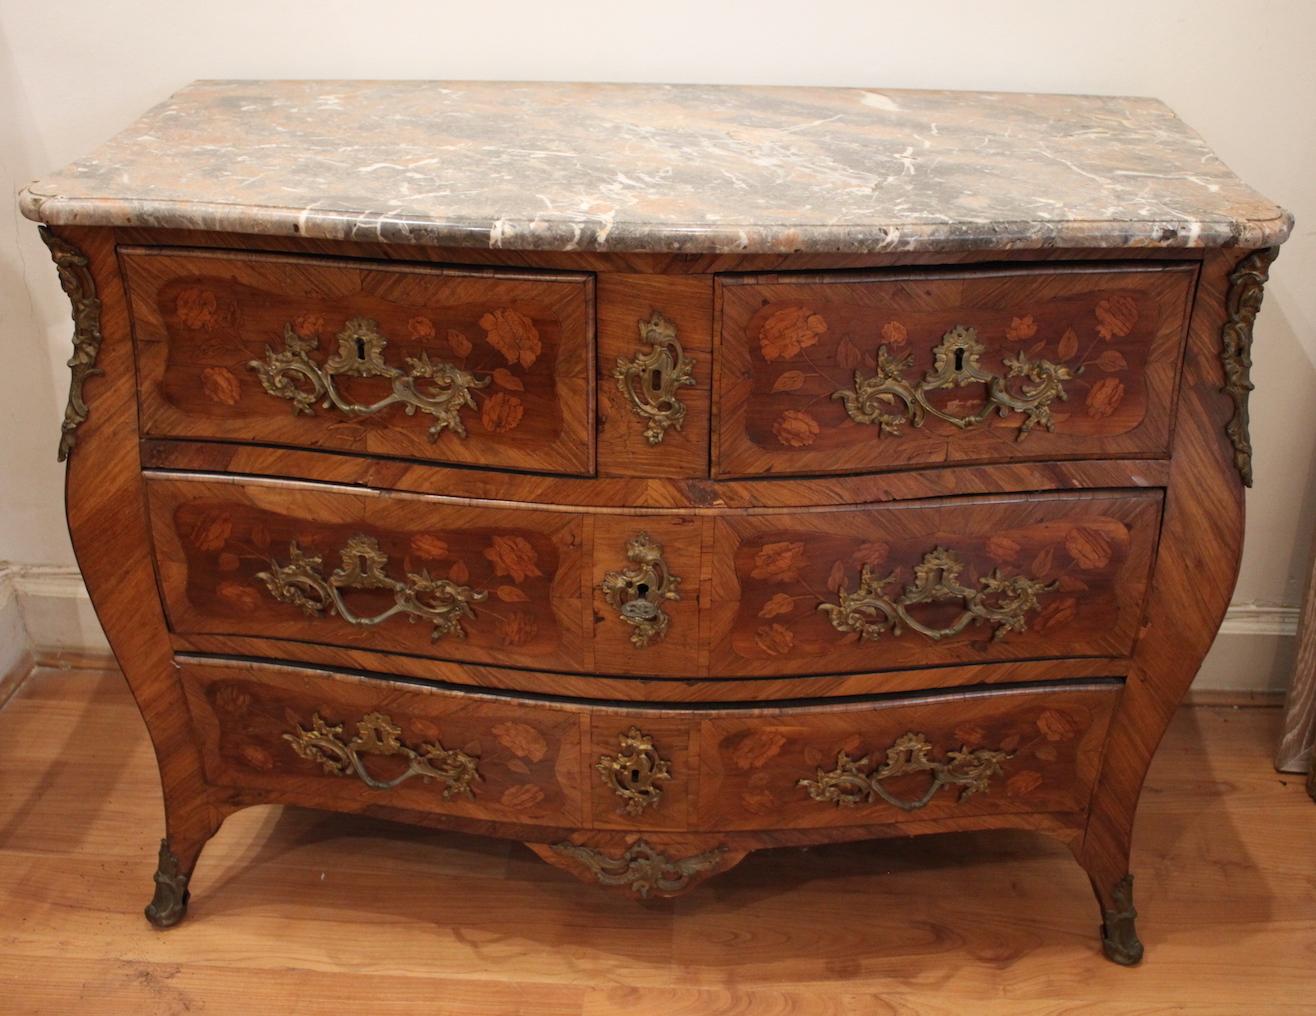 Louis XV commode in rosewood, curved and inlaid.
In its original state.
Dimensions: Width 110 cm Height 85.5 cm Depth: 53 cm.